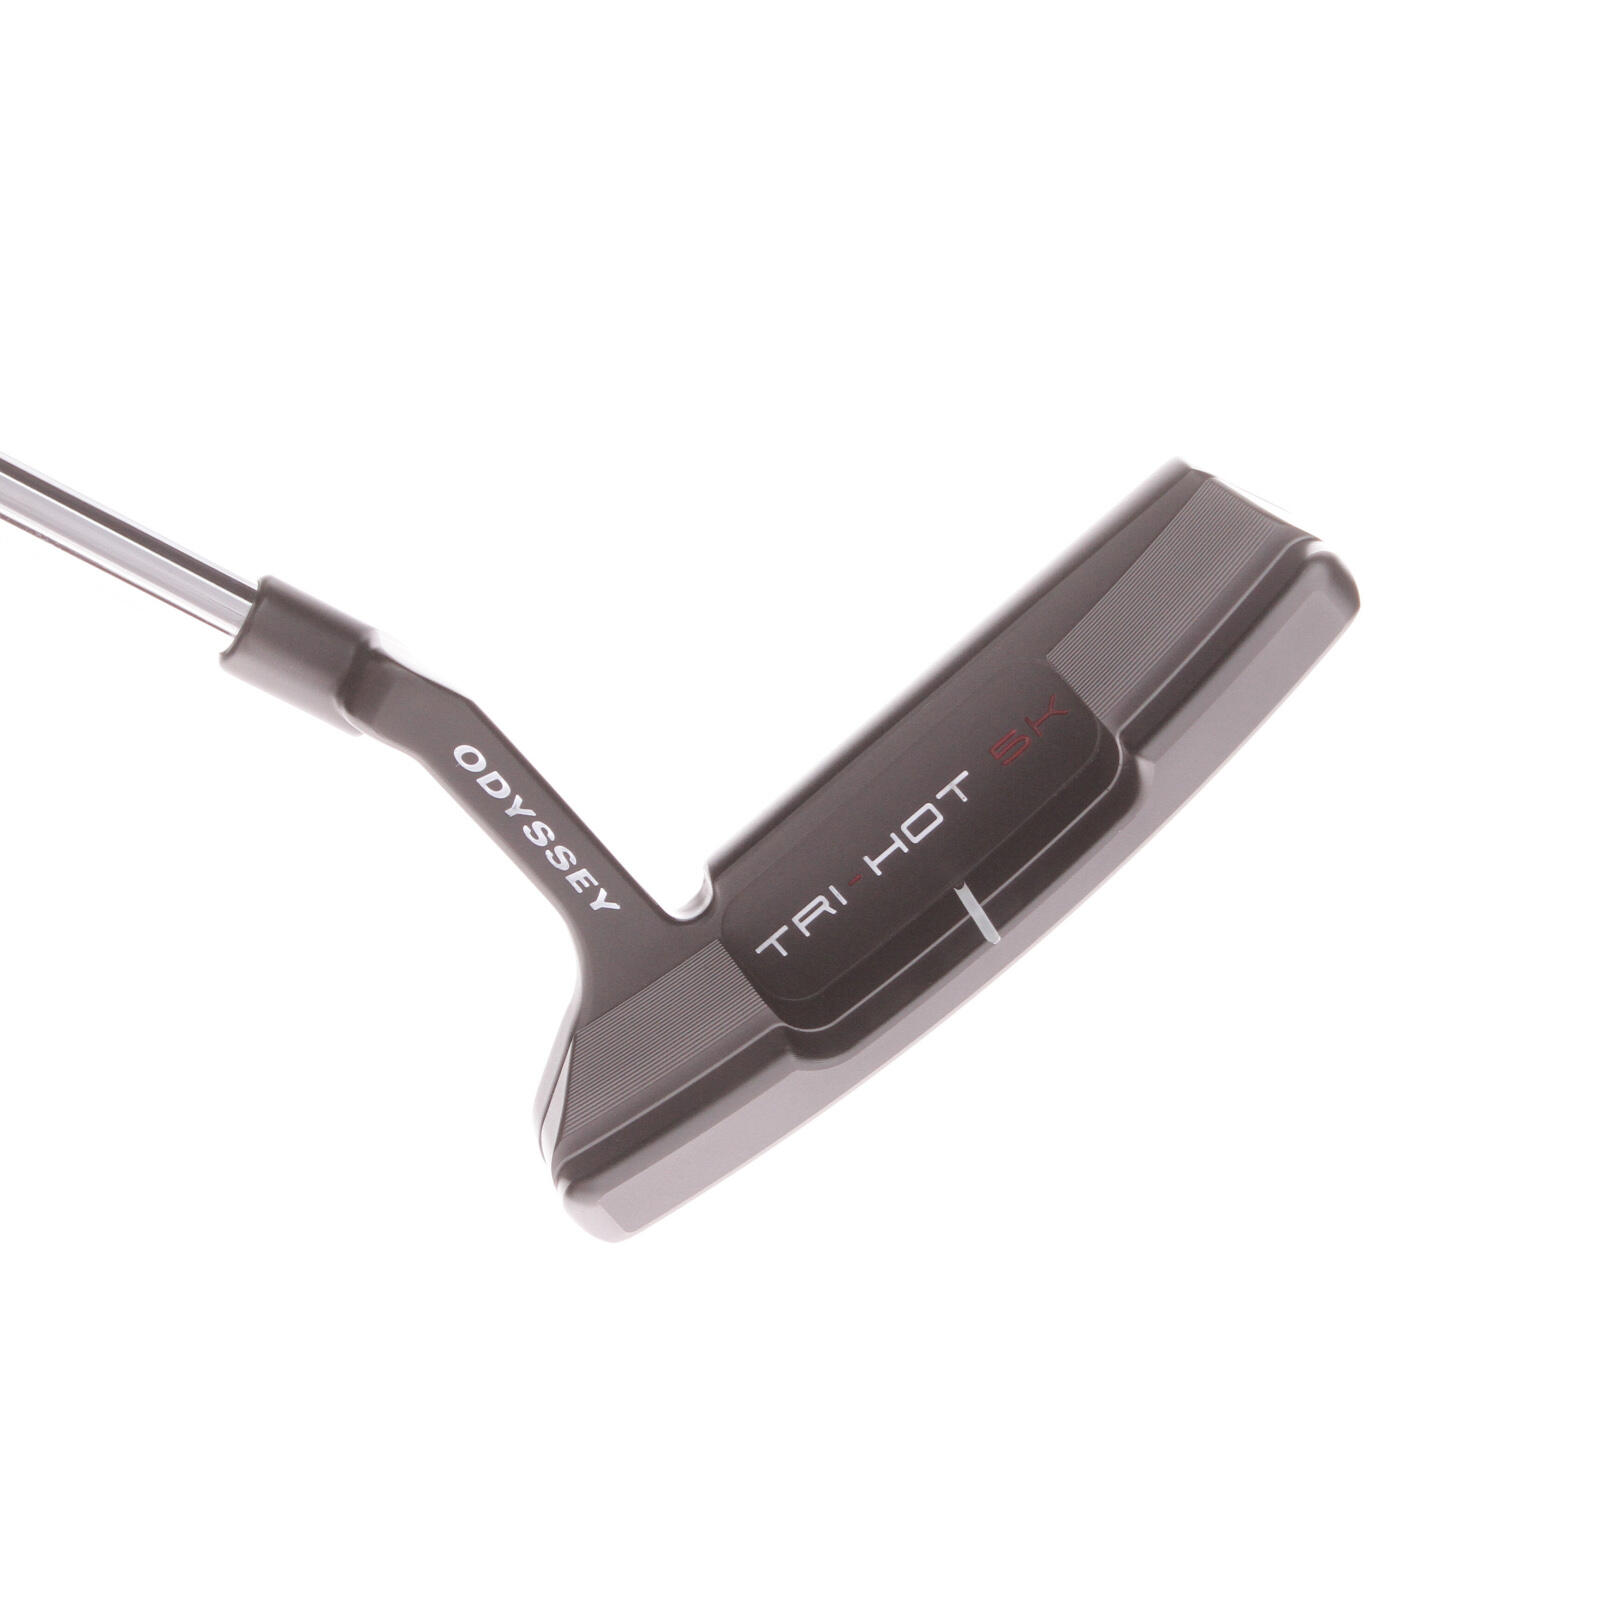 USED - Odyssey Tri-Hot 5K Two Putter 31.5 Inches Length Graphite Shaft - GRADE B 5/7